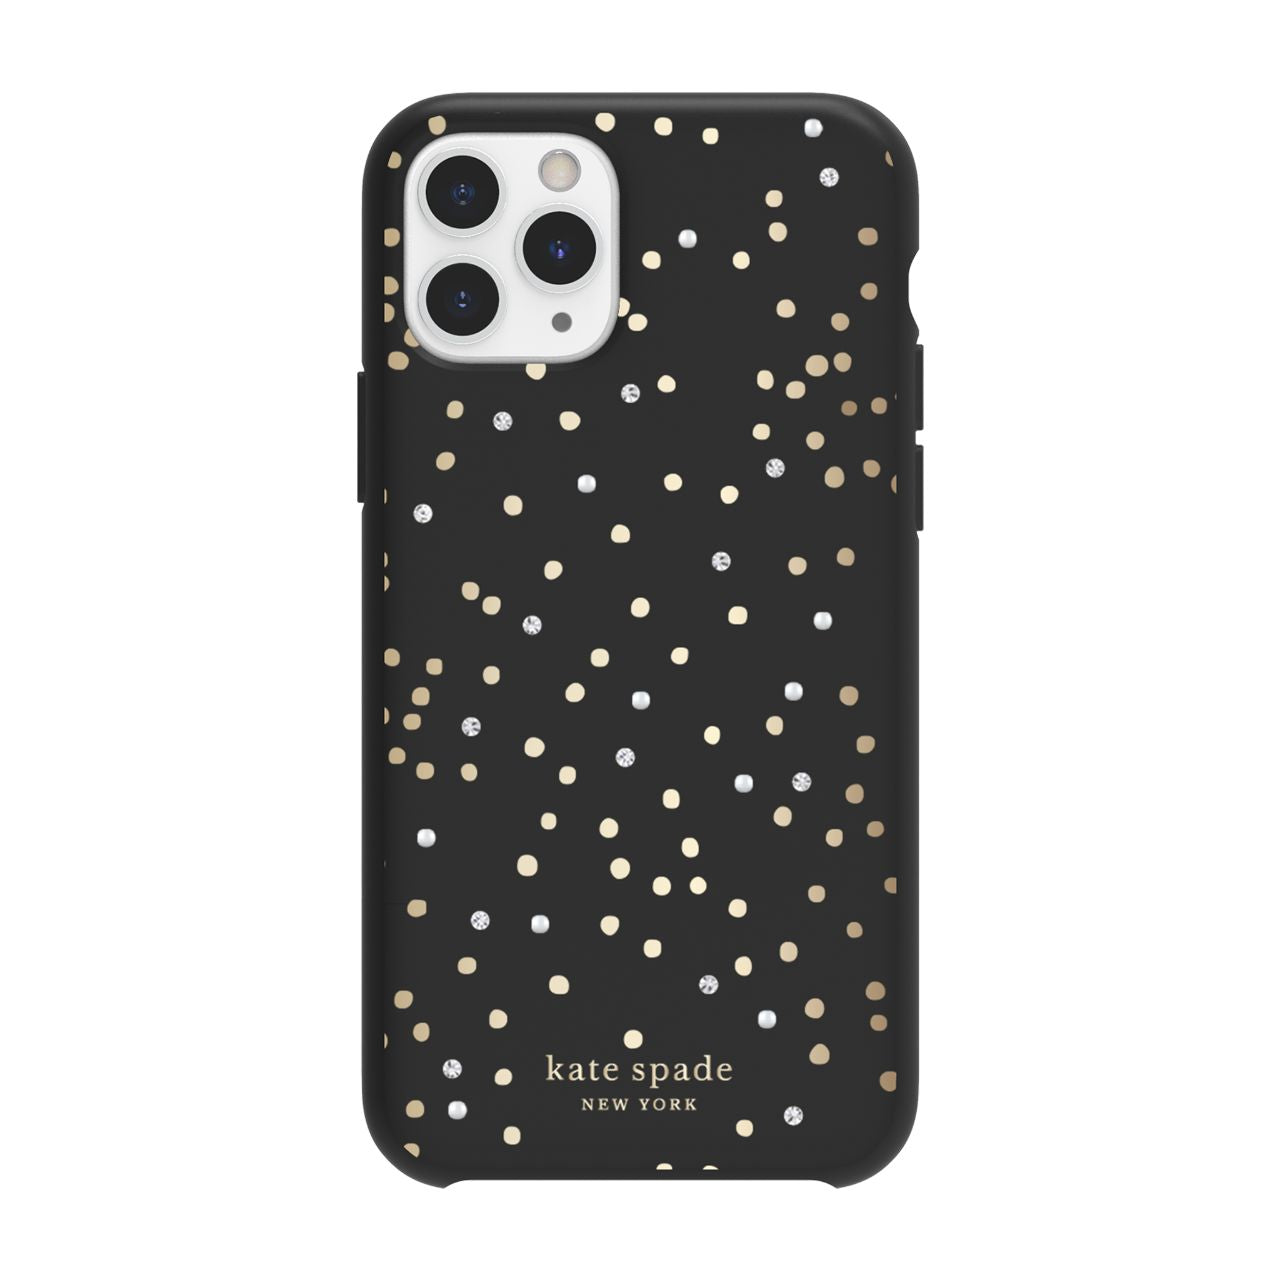 kate spade Protective Hardshell Case for iPhone 11 Pro, Soft Touch Disco Dots Black/Gold/Crystal Gems/Pearls